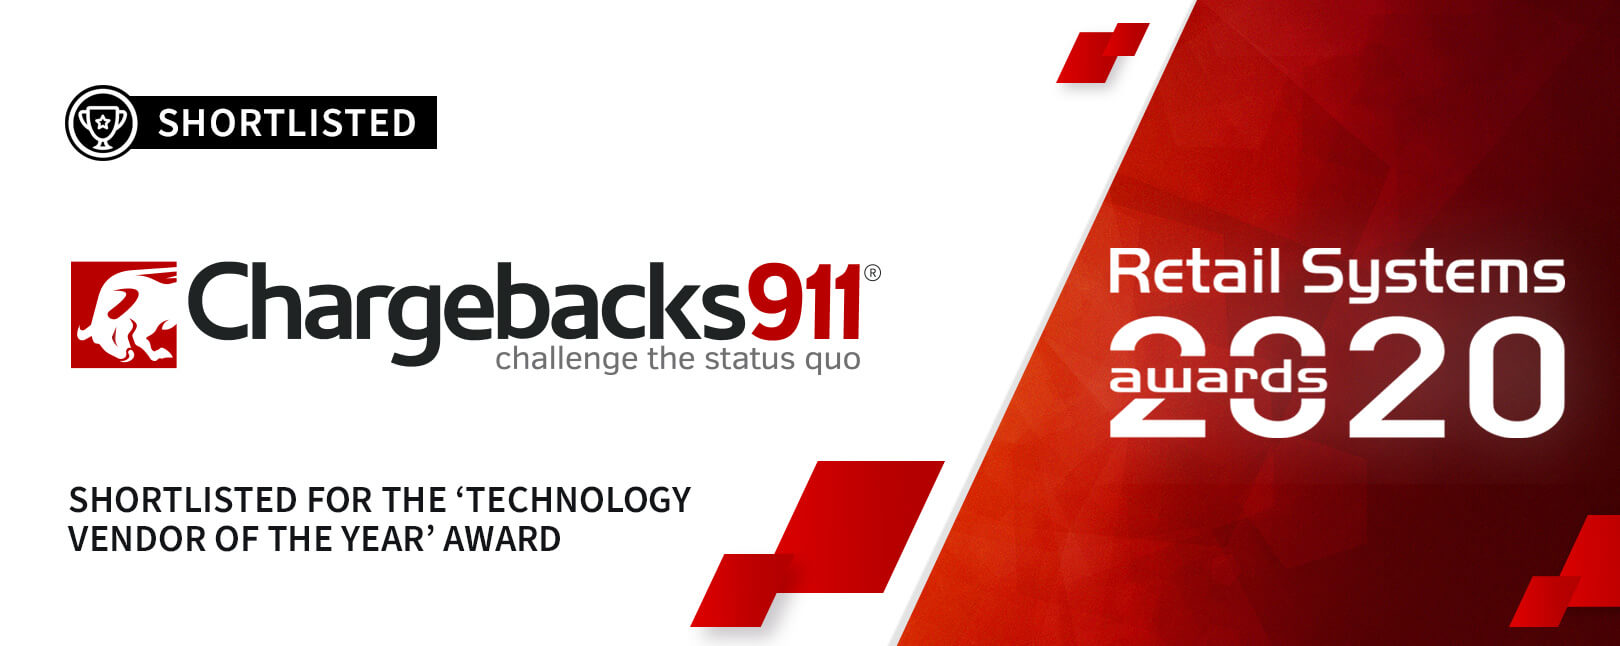 Chargebacks911® Recognized for “Technology Vendor of the Year”!